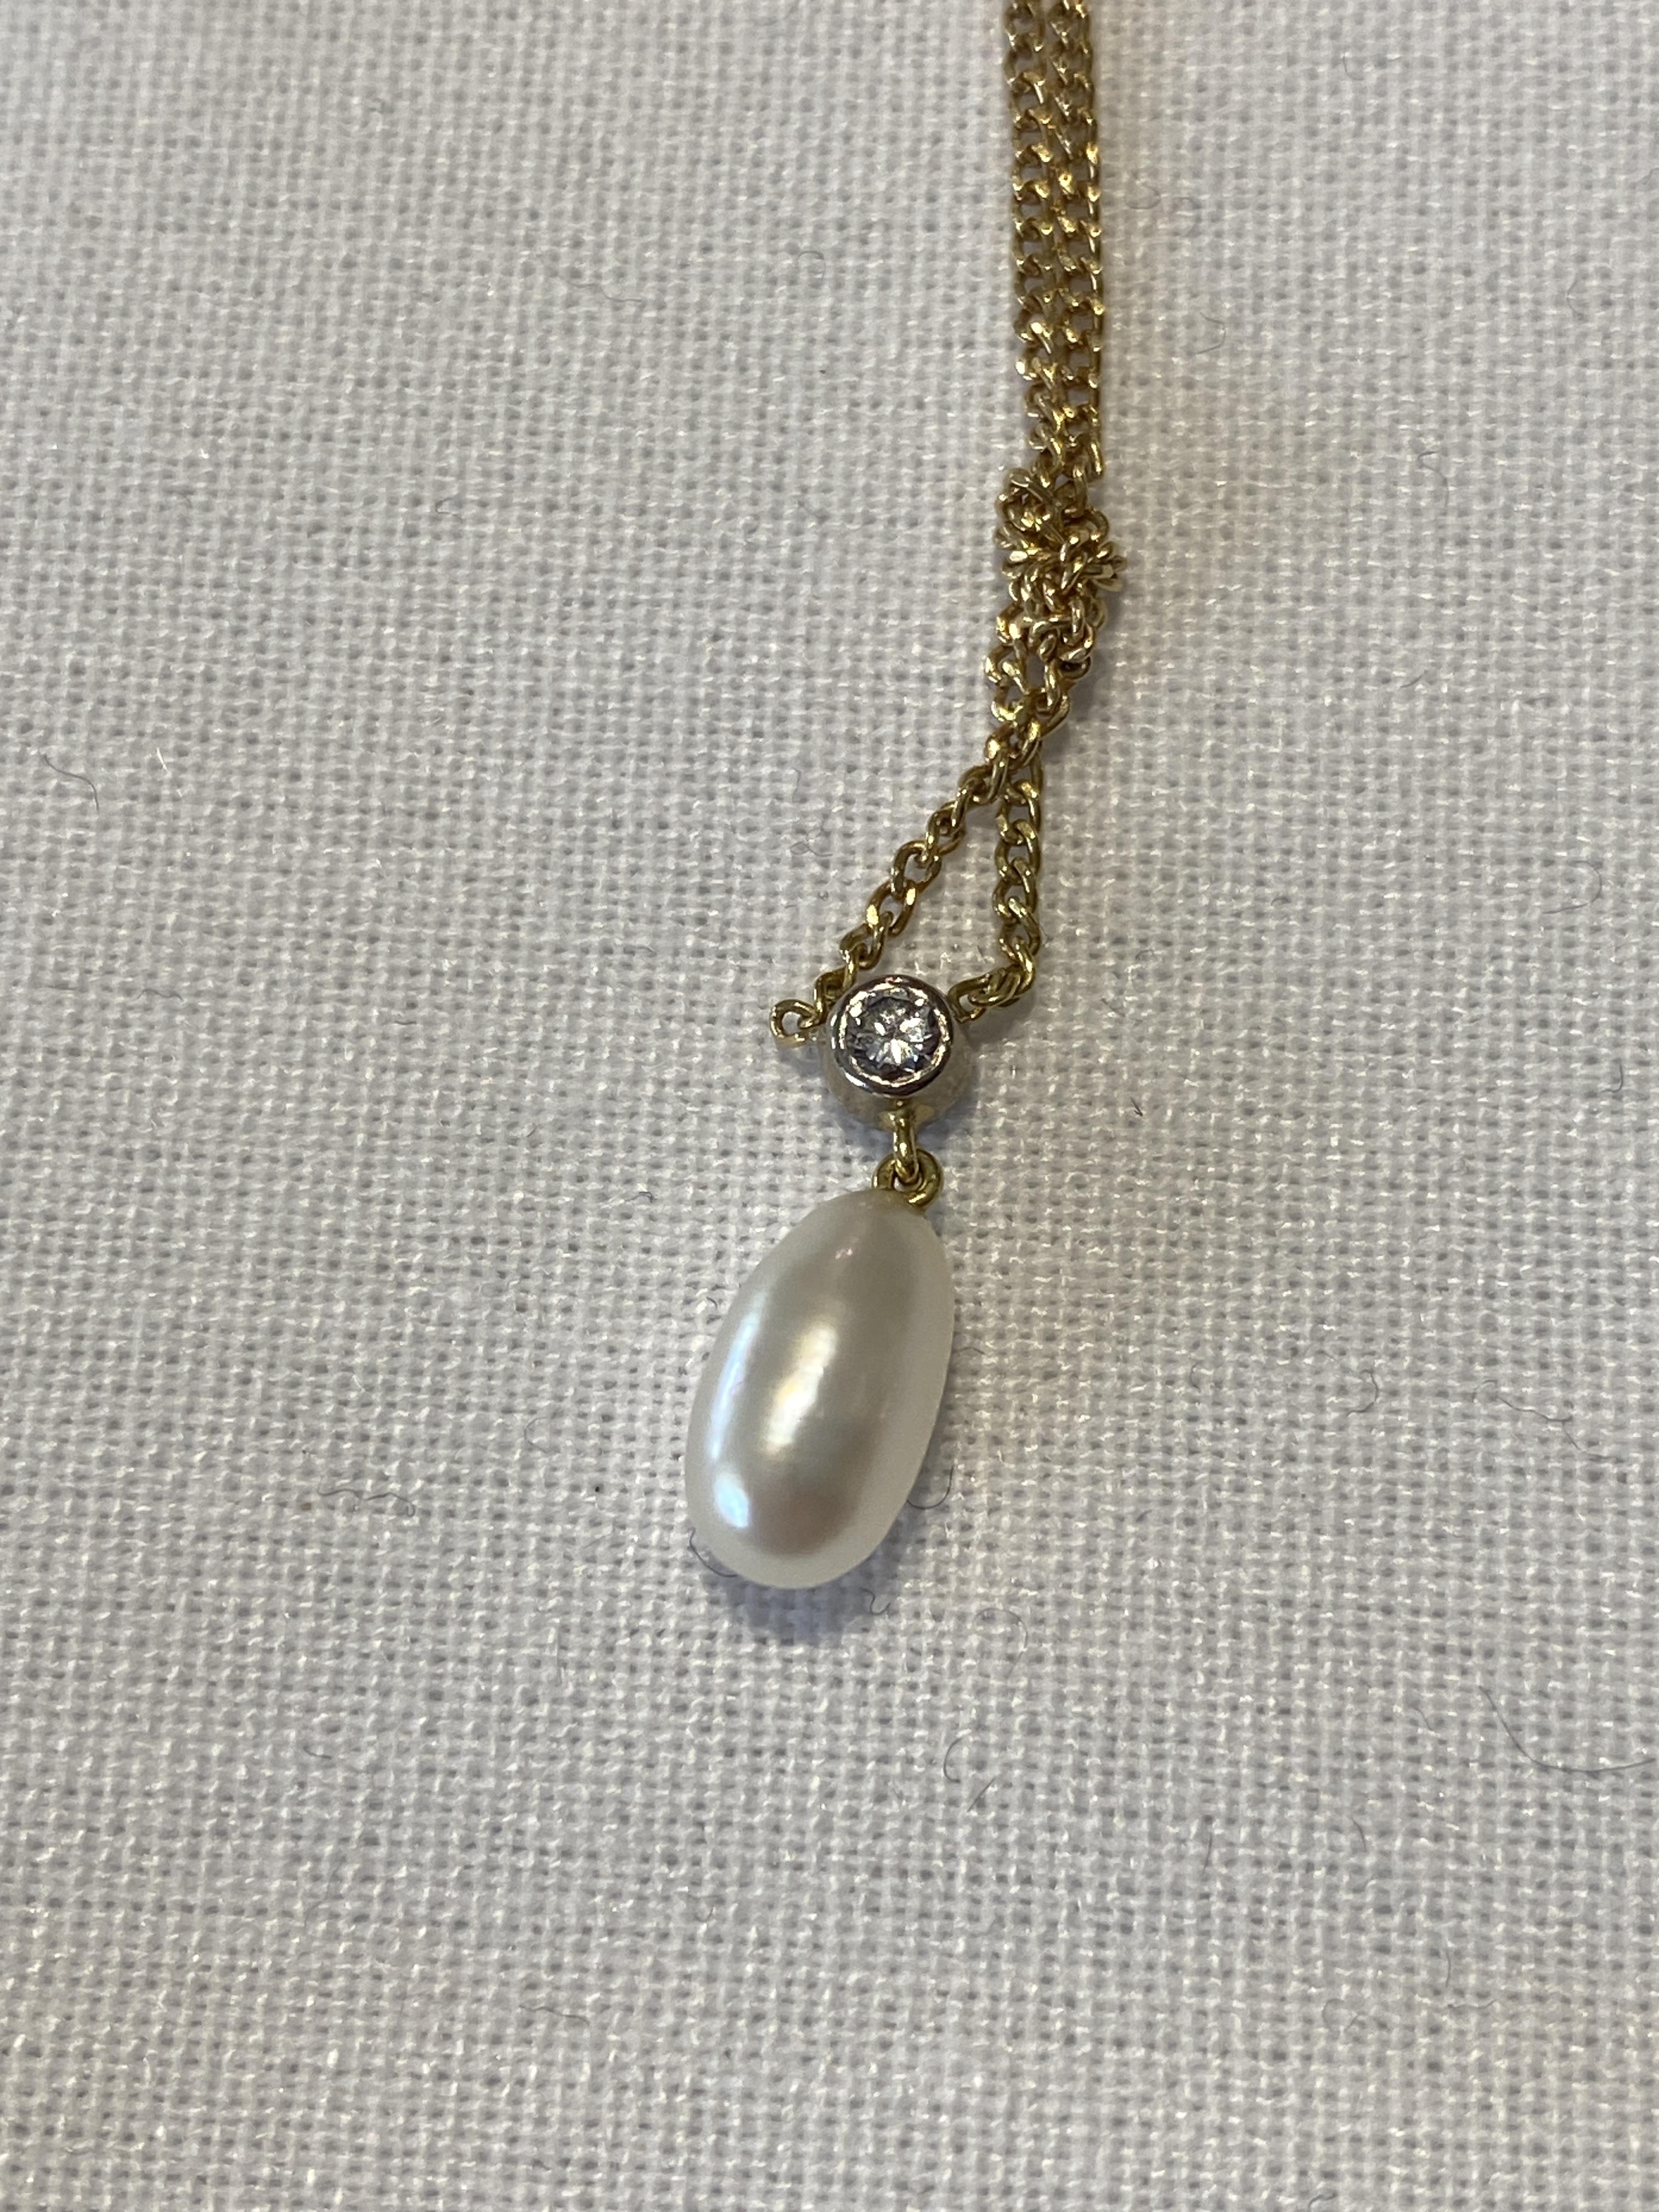 A cultured pearl and diamond pendant necklace - Image 3 of 3